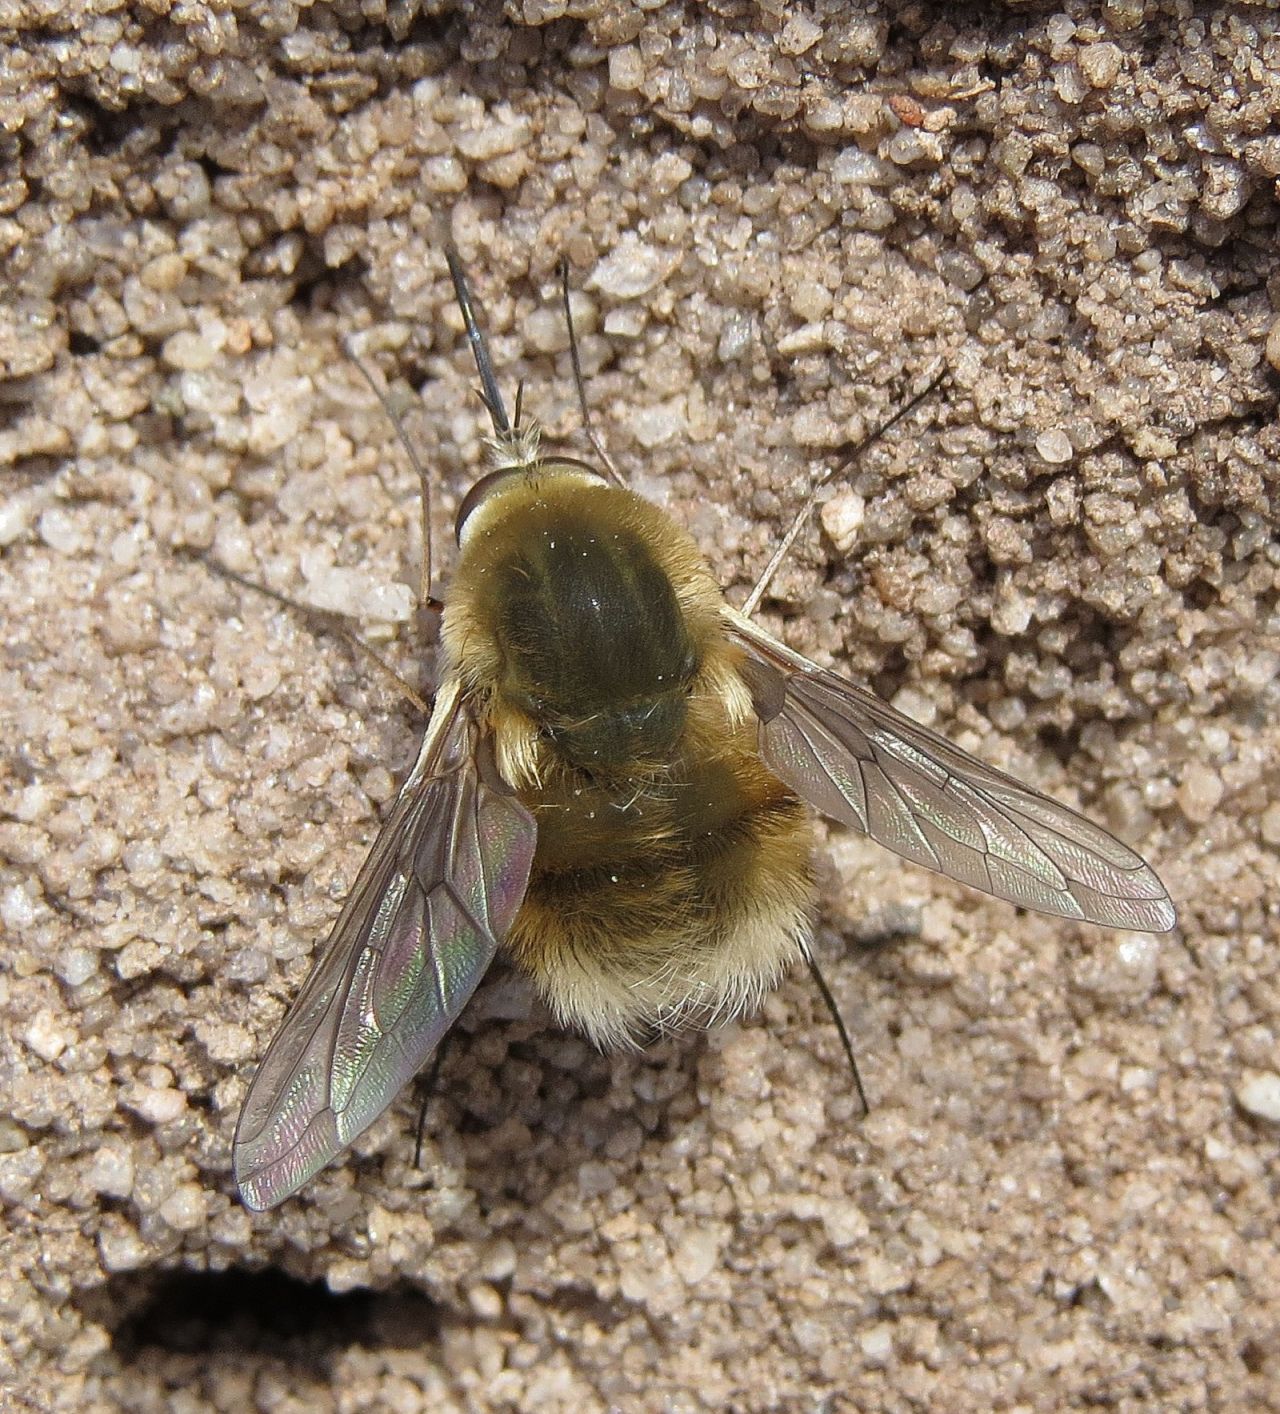 The heath bee-fly is a vulnerable species that can be found <a href="https://naturebftb.co.uk/wp-content/uploads/2020/05/Heath-Bee-fly.pdf" target="_blank" target="_blank">sucking up nectar on flower-rich habitats adjacent to heathland</a>.